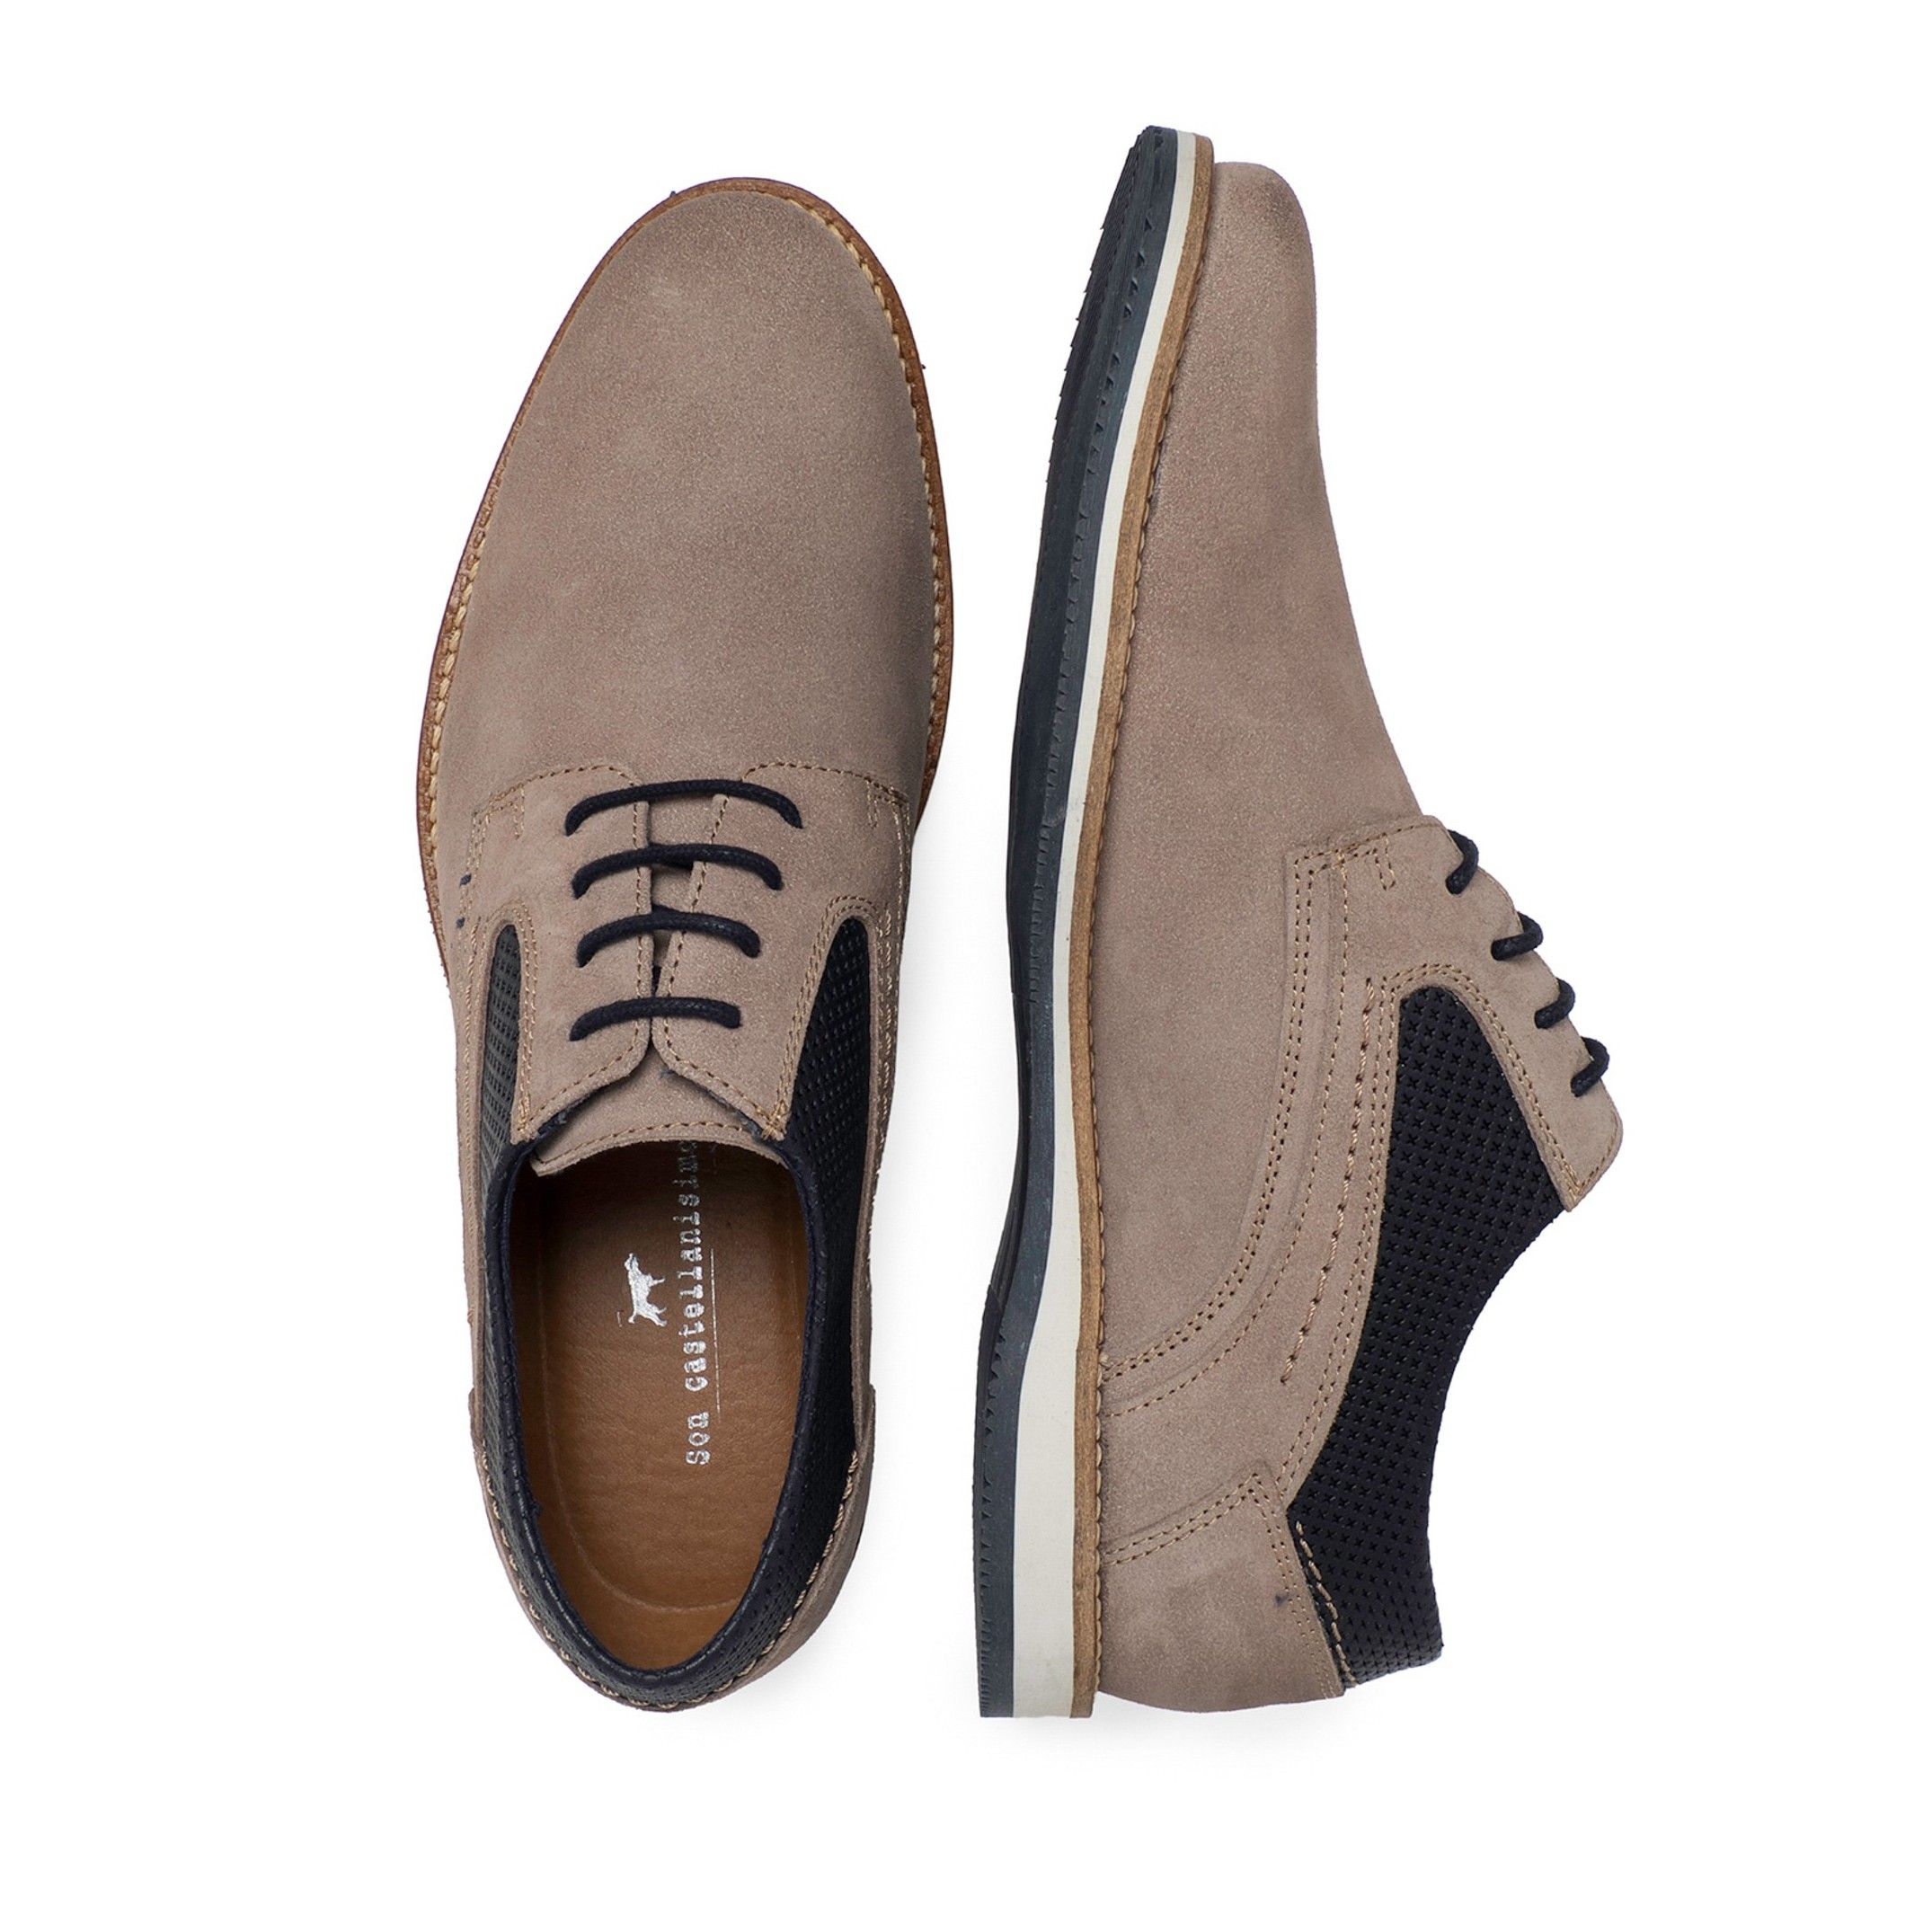 Lace up shoes by Son Castellanisimos. Upper made of nappa and split leather. Inner and insole made of cowhide leather. Sole material: synthetic and non slip. Heel height: 2 cm. Designed and made in Spain.